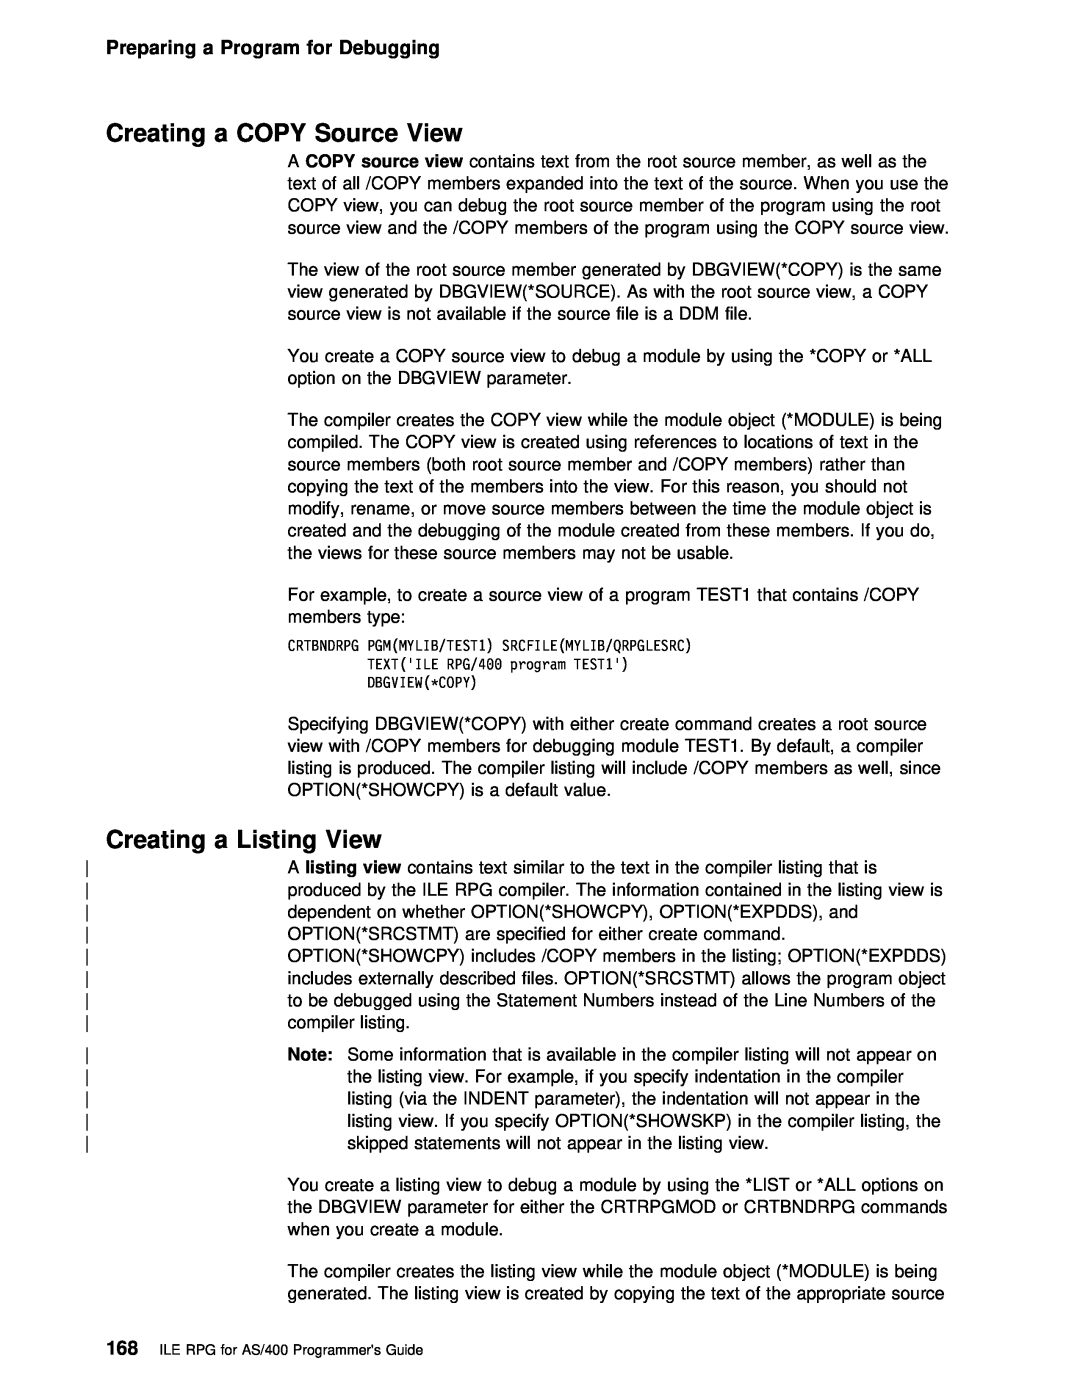 IBM AS/400 manual a Listing View, Creating a COPY Source, Preparing a Program for Debugging 